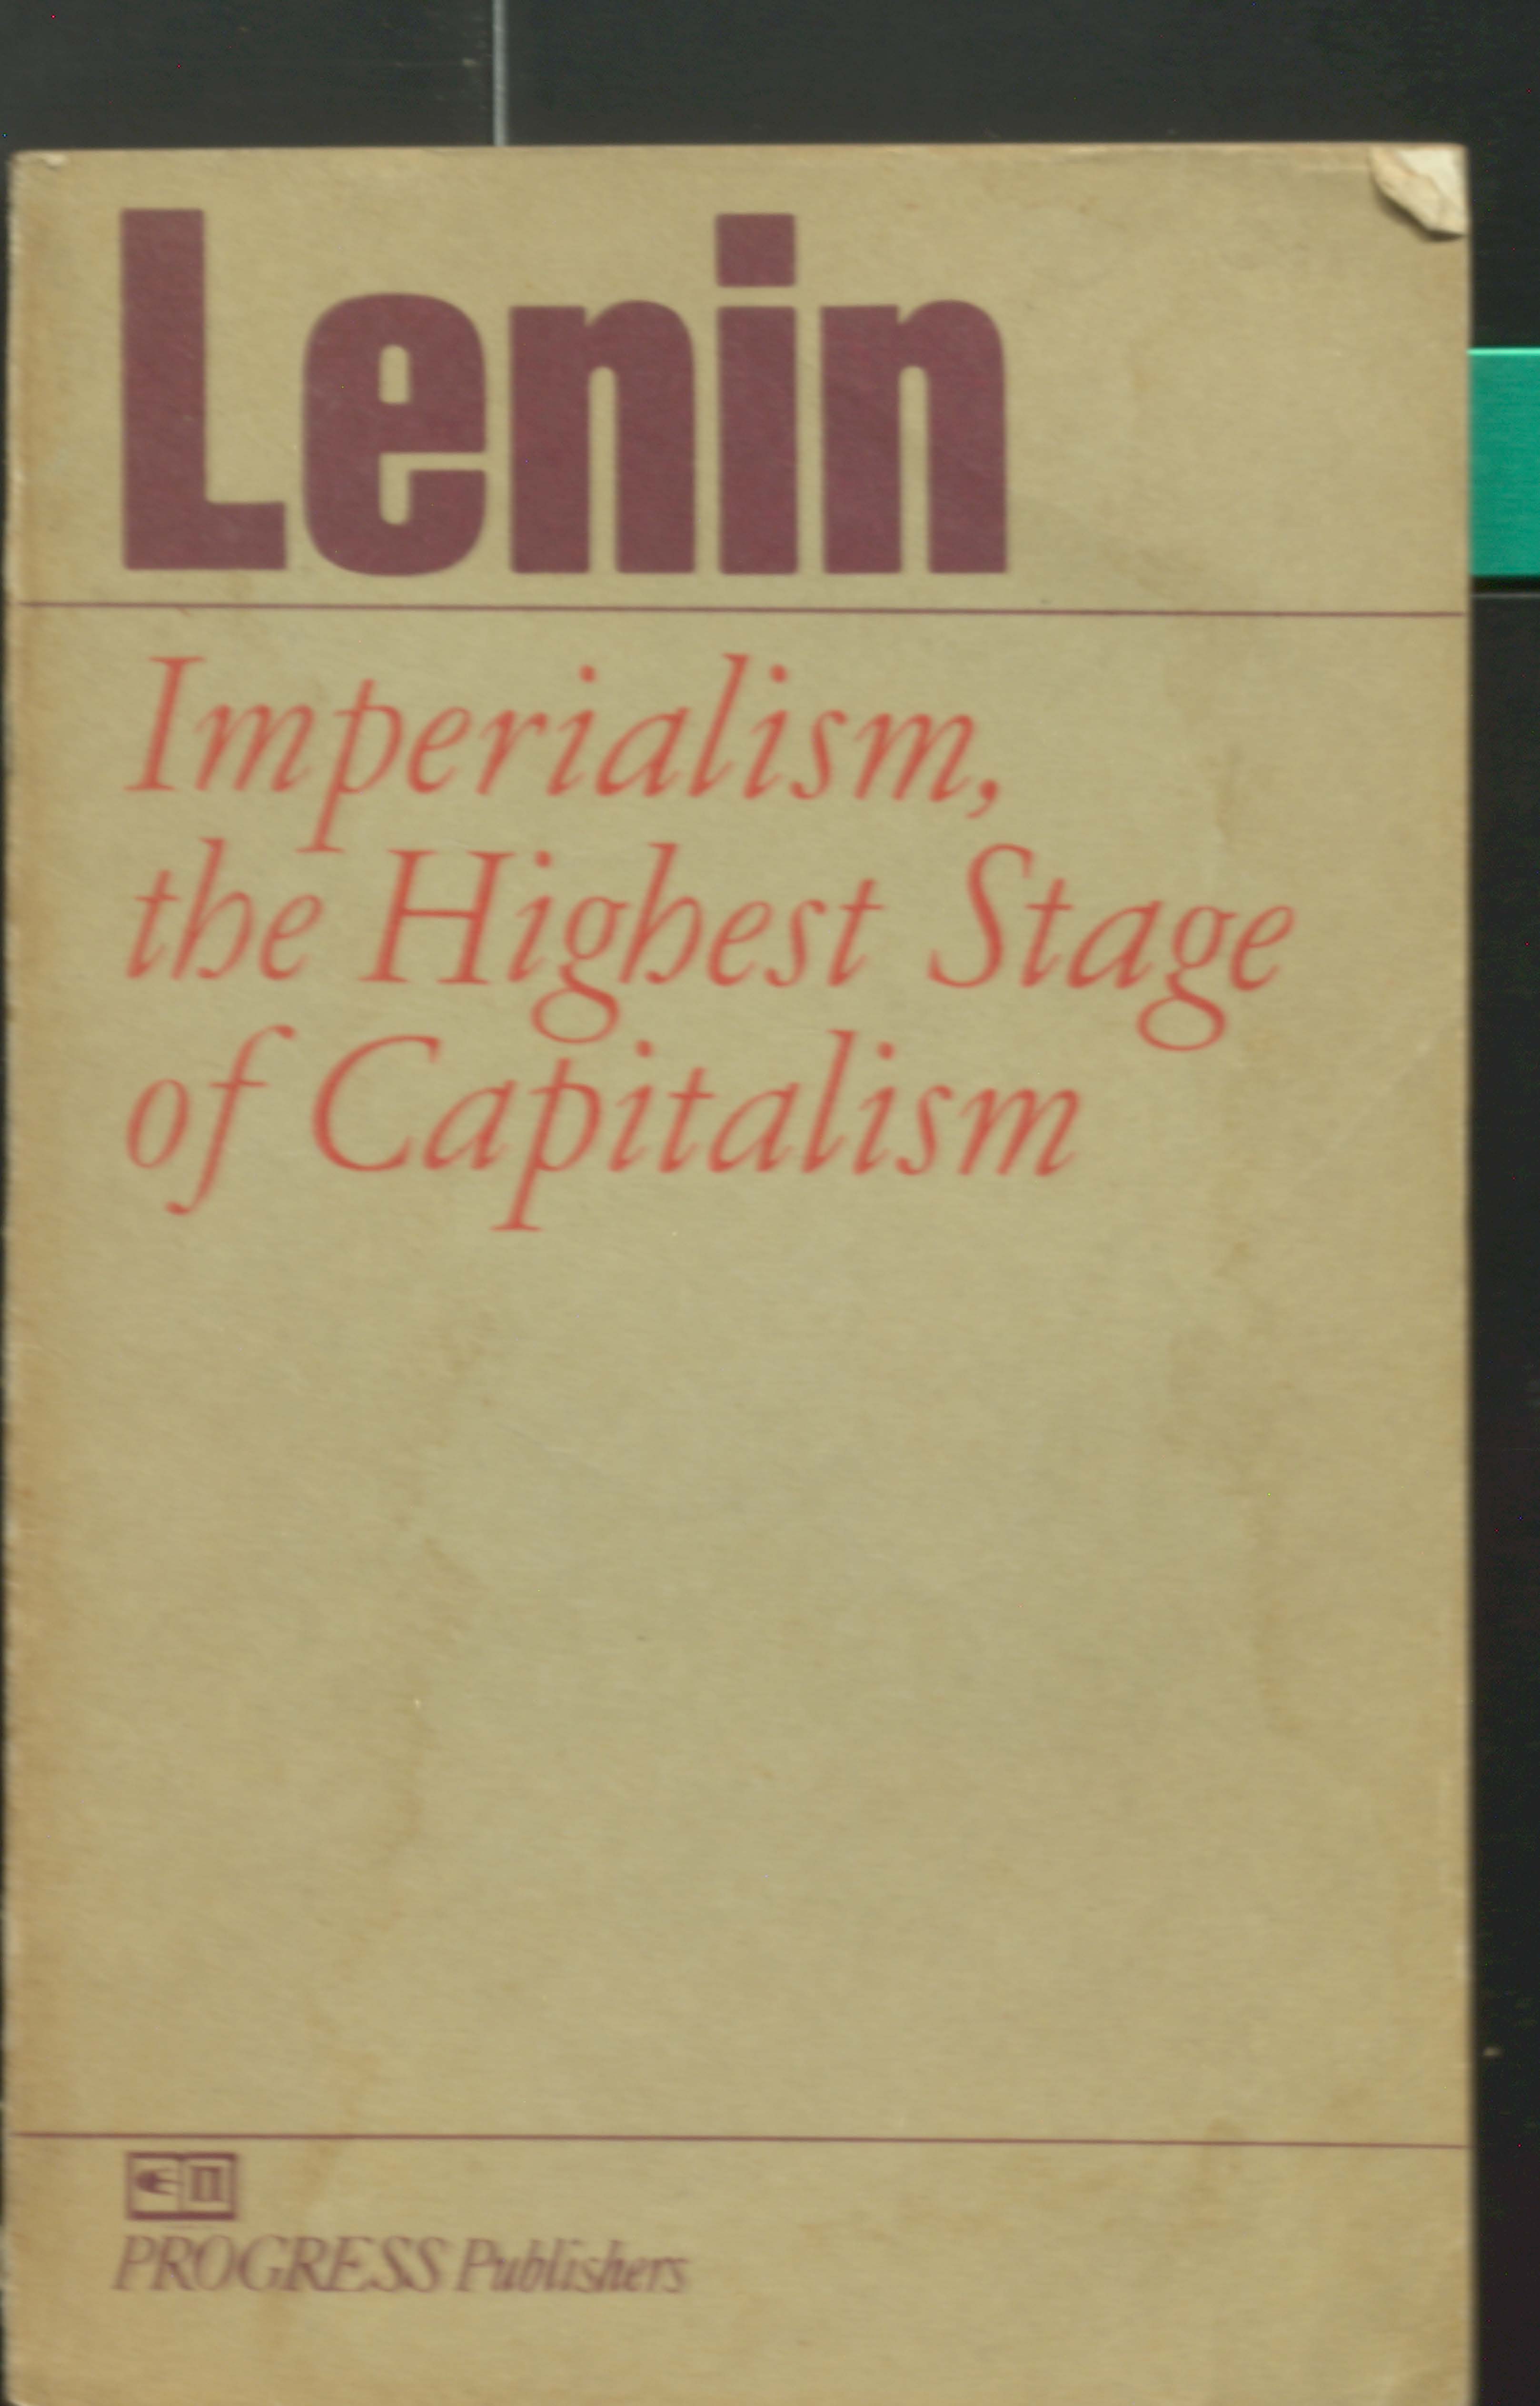 Lenin imperialism, the higbest stage of capitalism